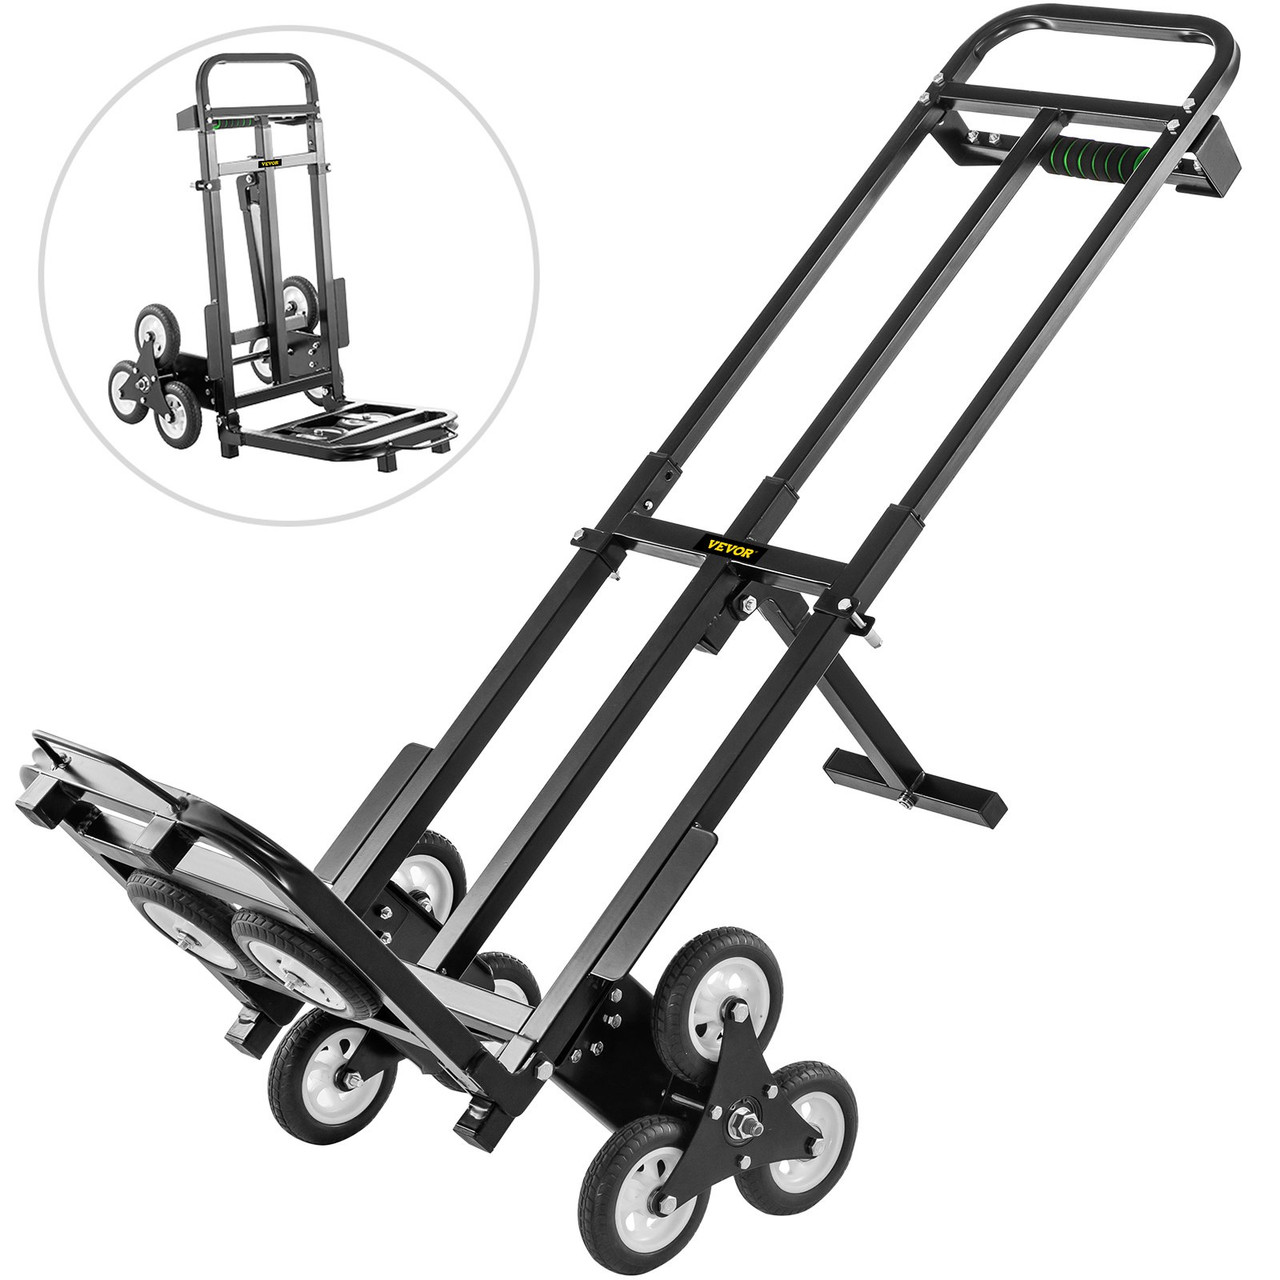 Stair Climbing Cart 460lbs Capacity, Portable Folding Trolley with 5Inch Wheels, Stair Climber Hand Truck with Adjustable Handle for Pulling, All Terrain Heavy Duty Dolly Cart for Stairs